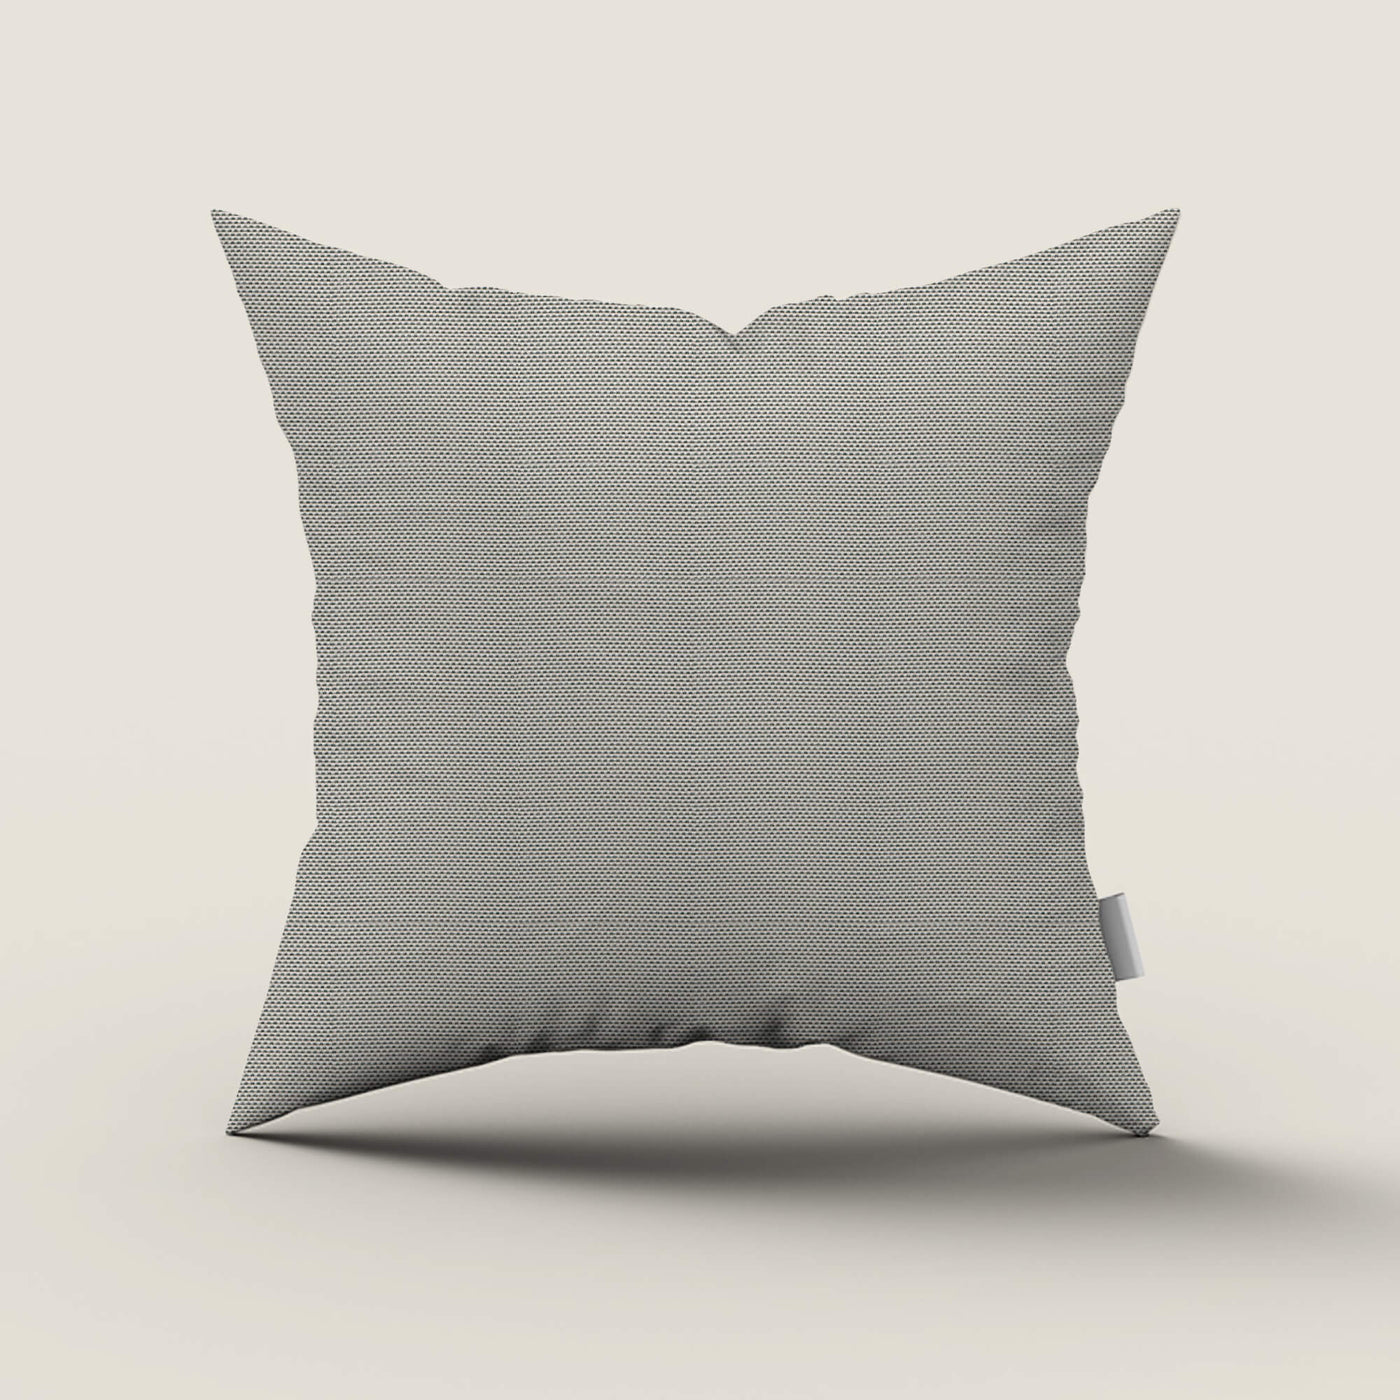  Outdoor Throw Pillow Waterproof Pillows,Vintage Gothic